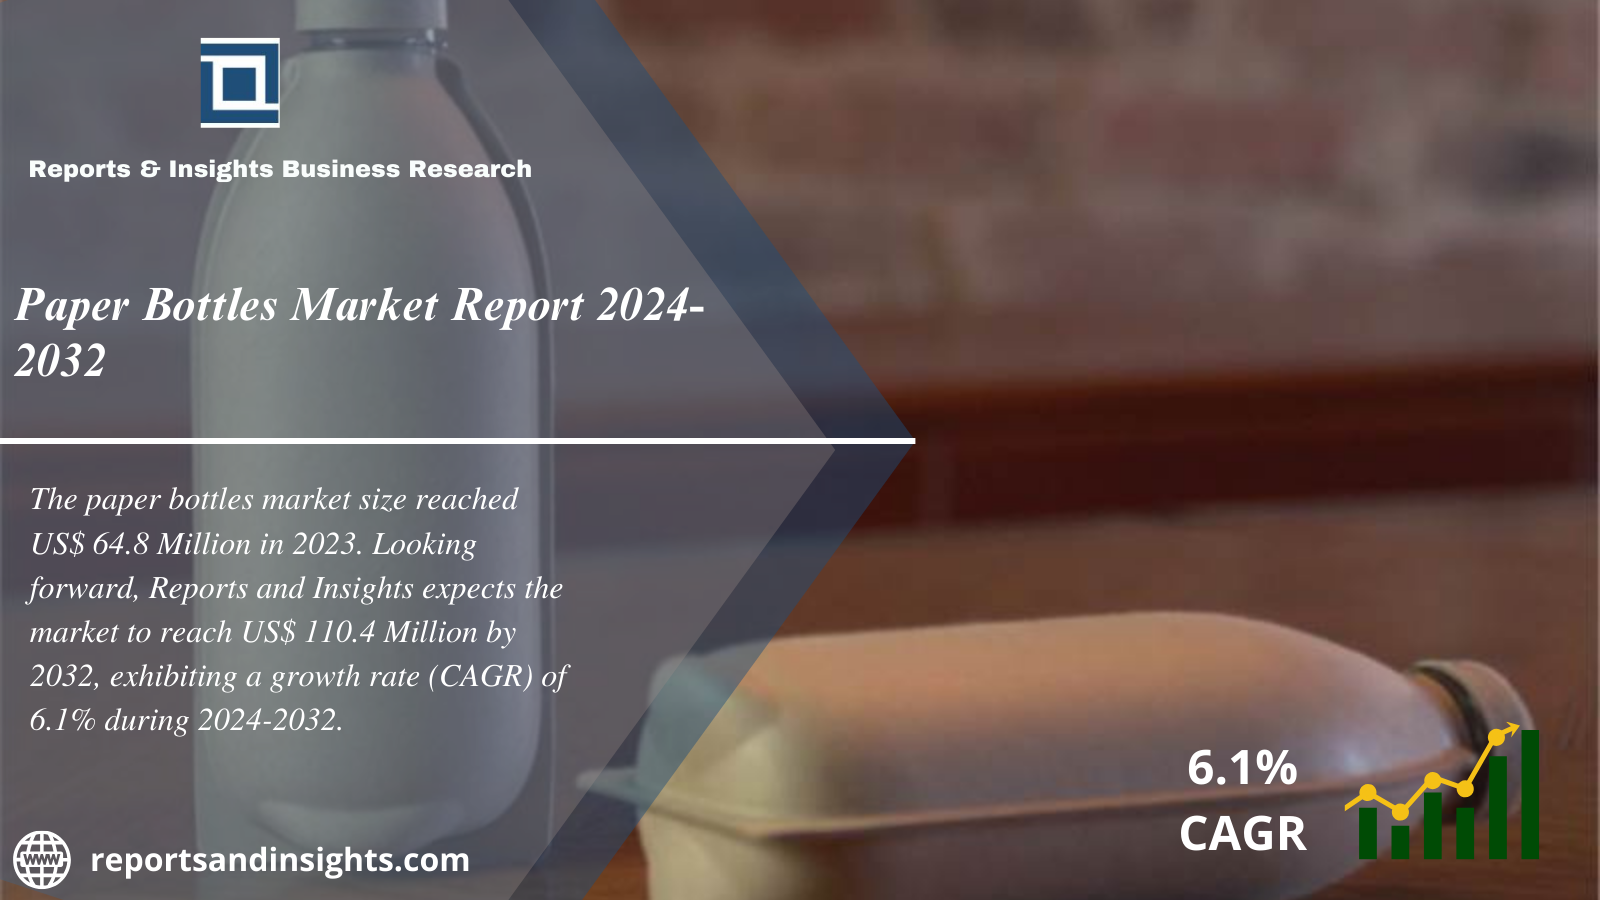 Paper Bottles Market Research Report 2024 to 2032: Trends, Growth, Size, Share and Key Players